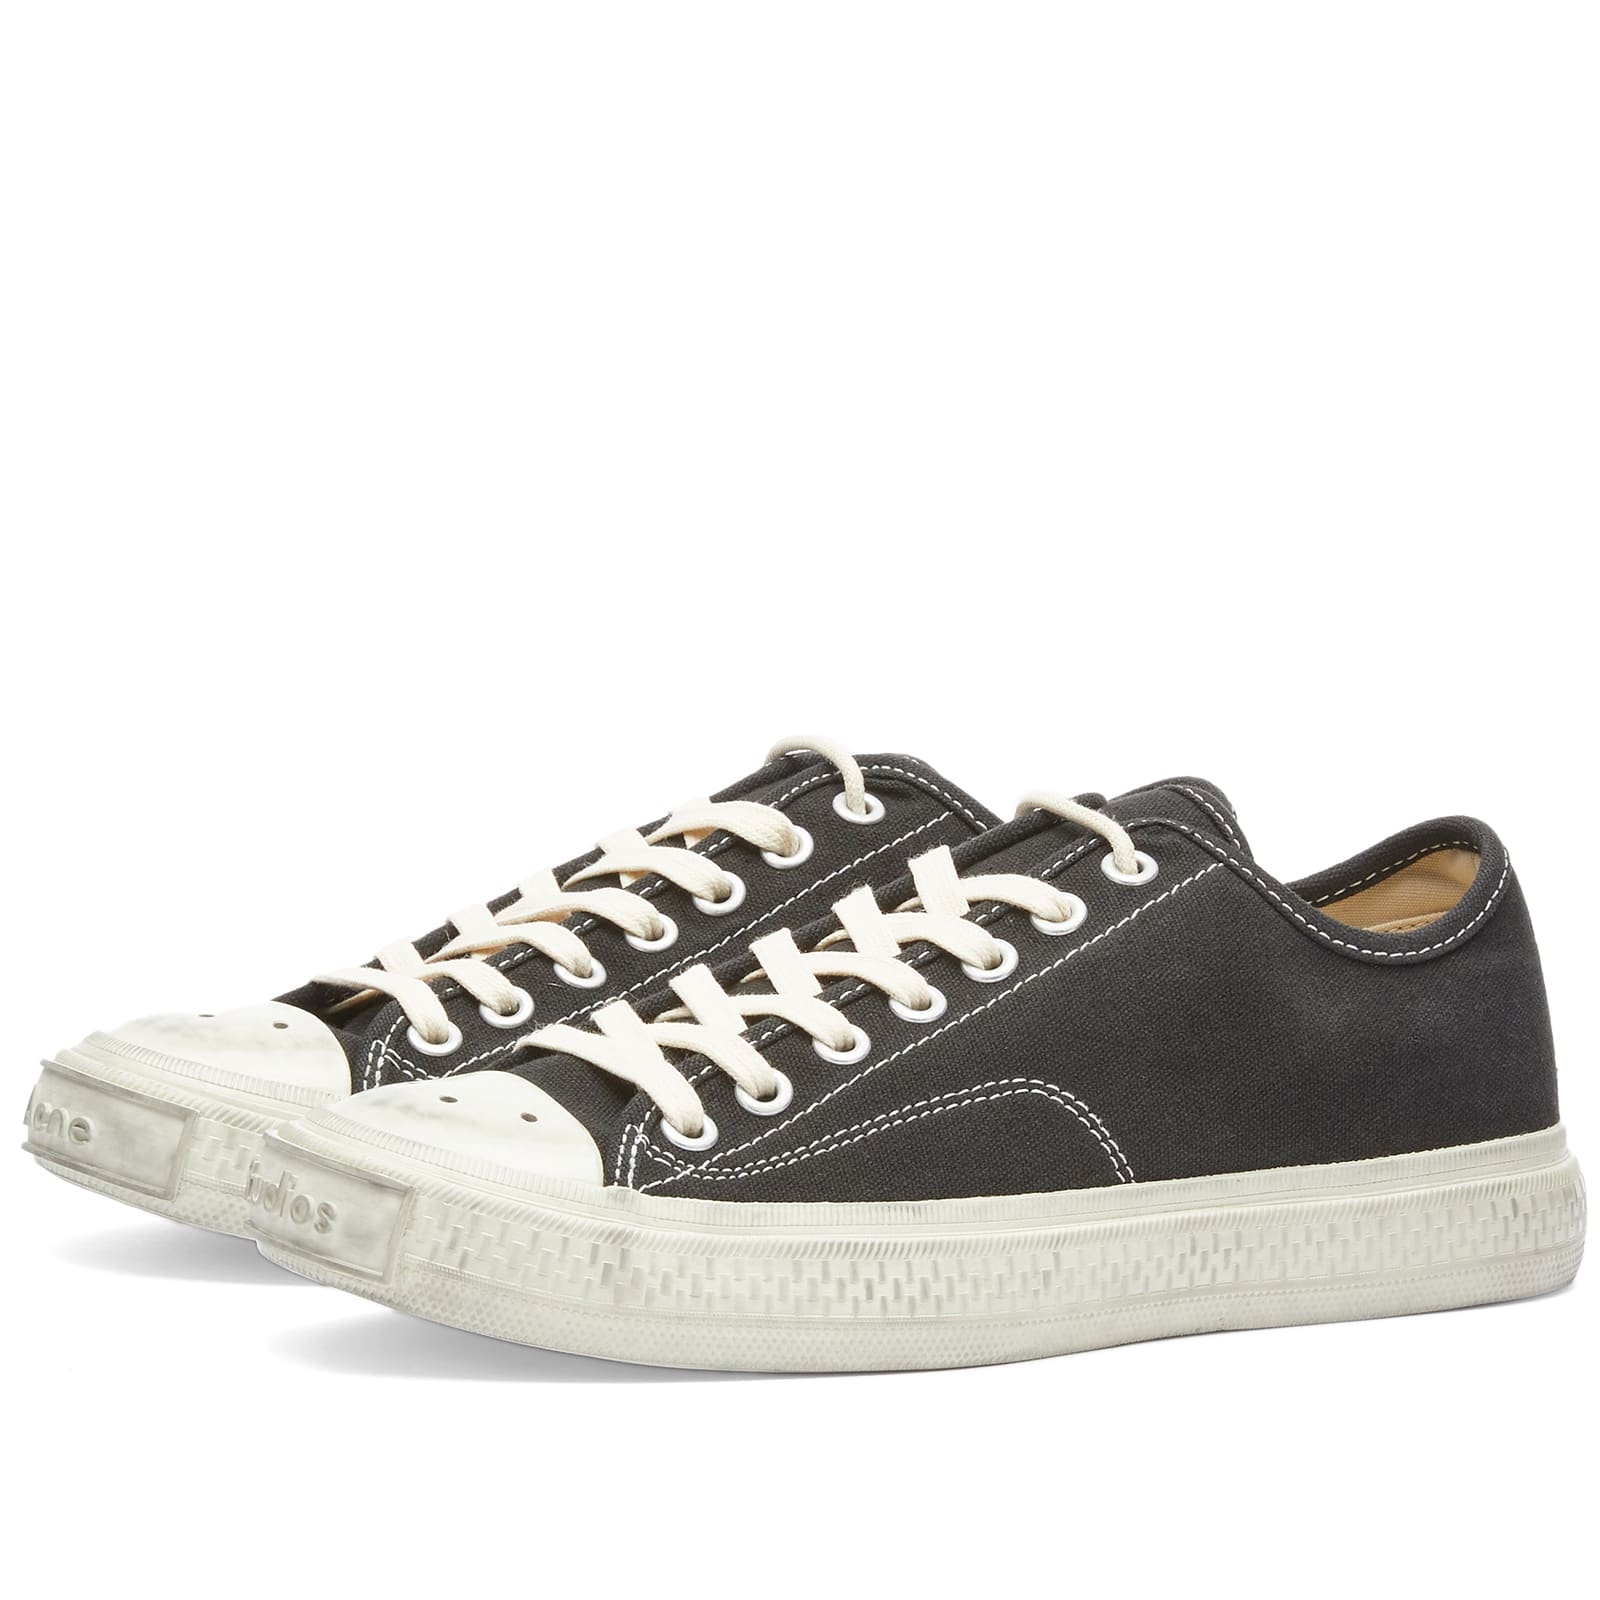 Acne Studios Ballow Soft Tumbled Tag Sneakers - 1